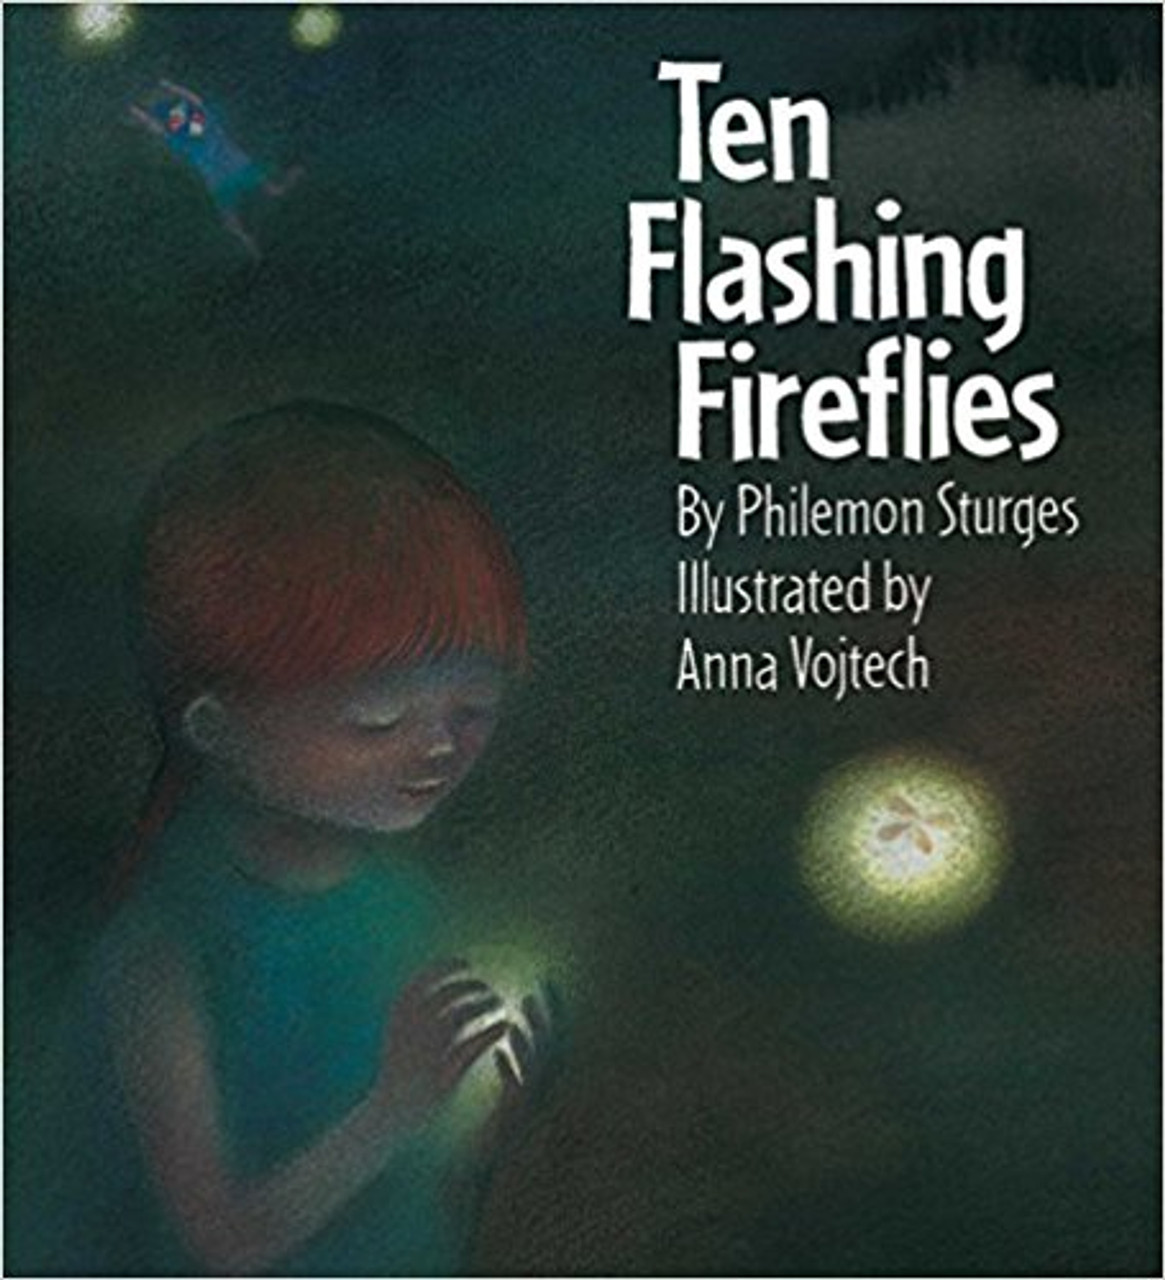 Luminous pictures and a buoyant, chant-aloud text, combine to make this two-way counting book as joyous and magical as catching fireflies on a summer night.